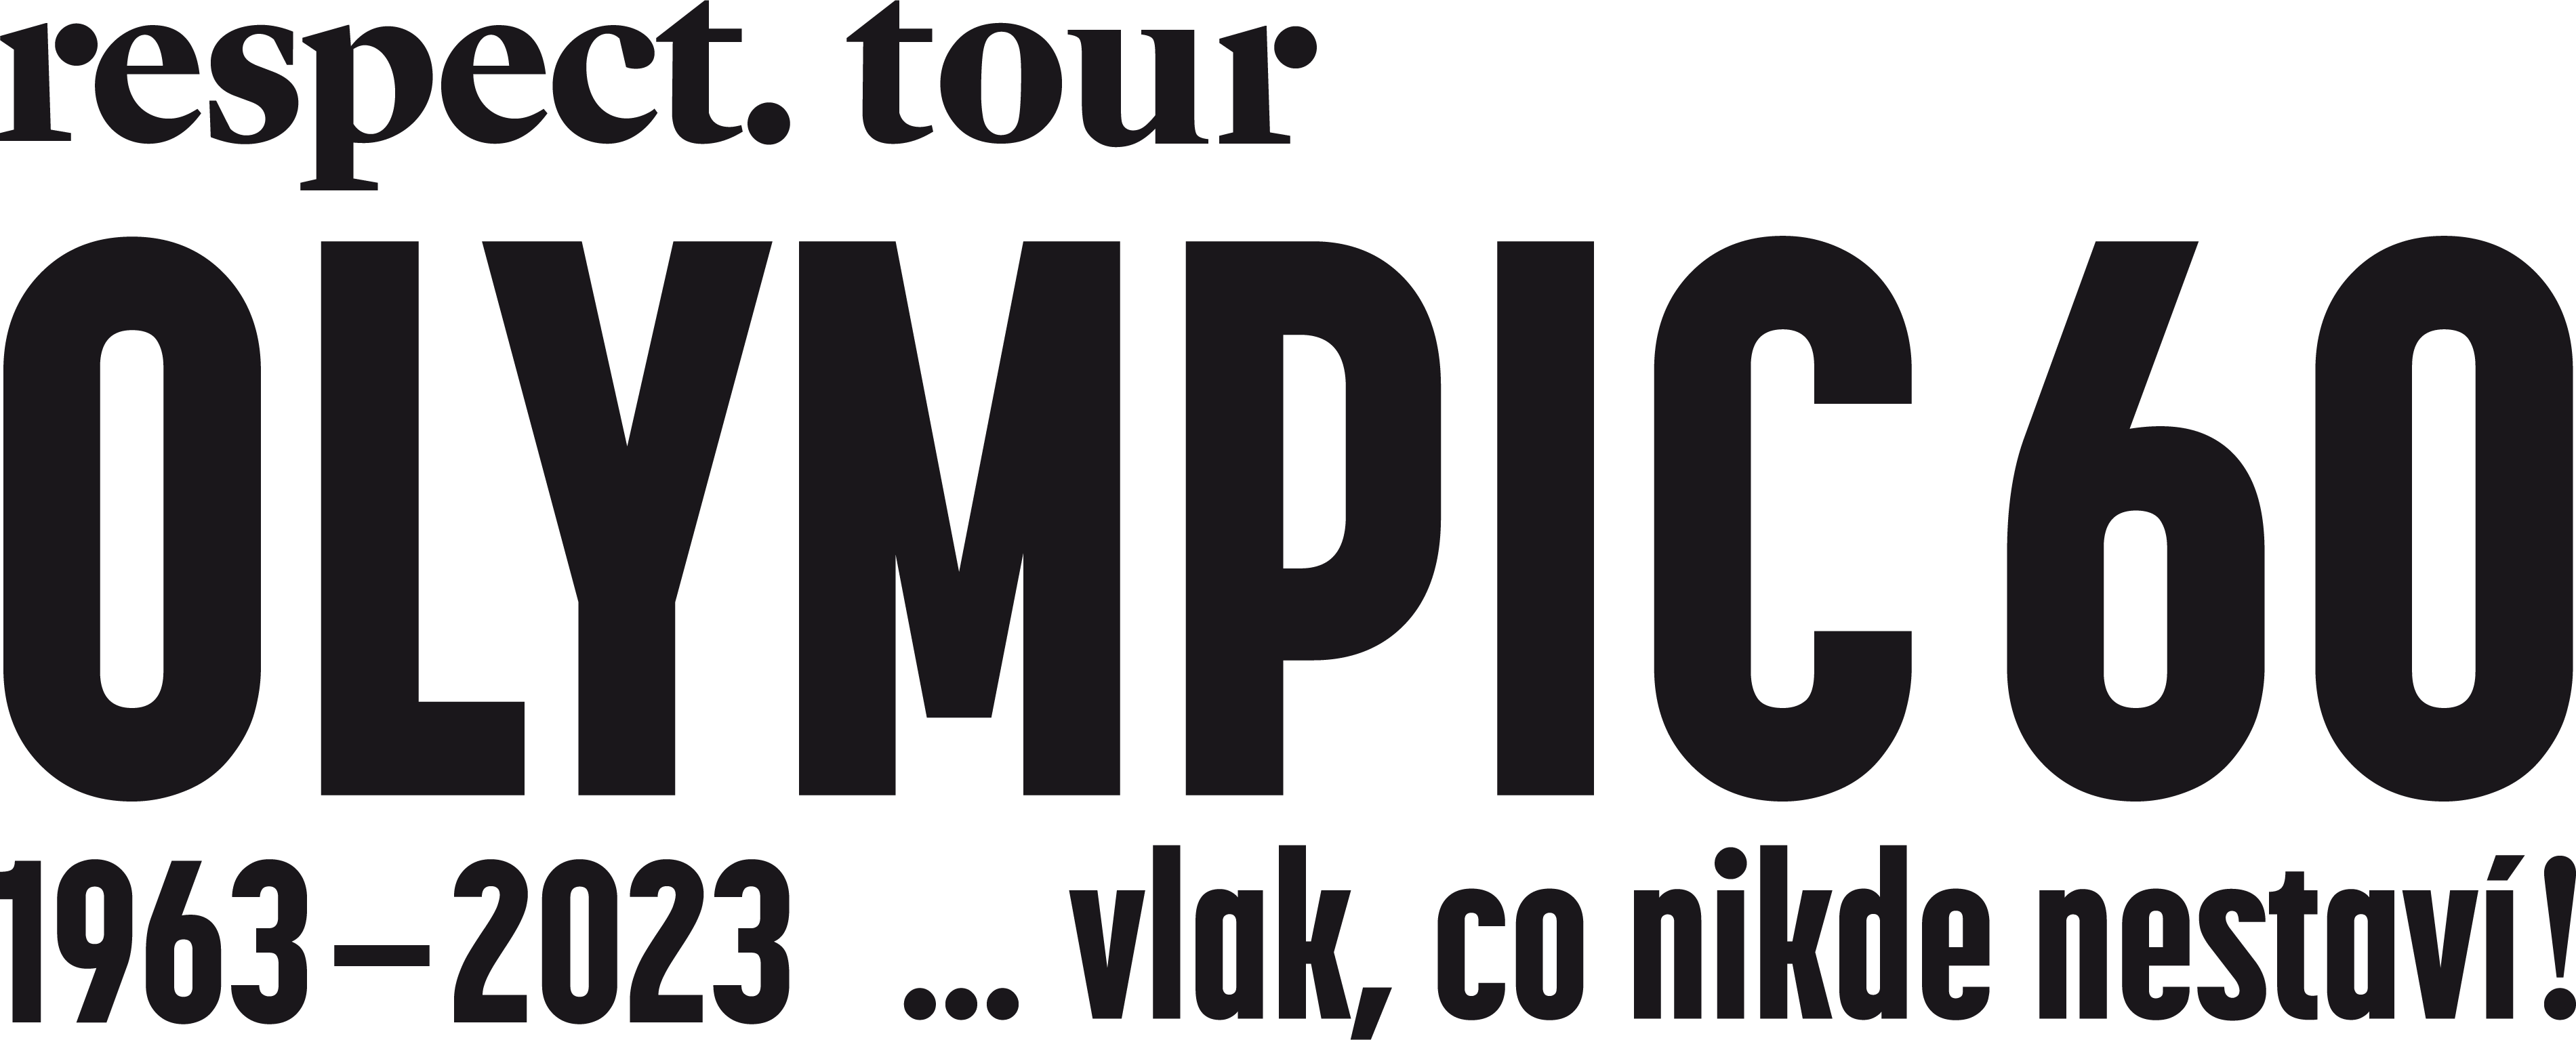 Respect tour Olympic 60